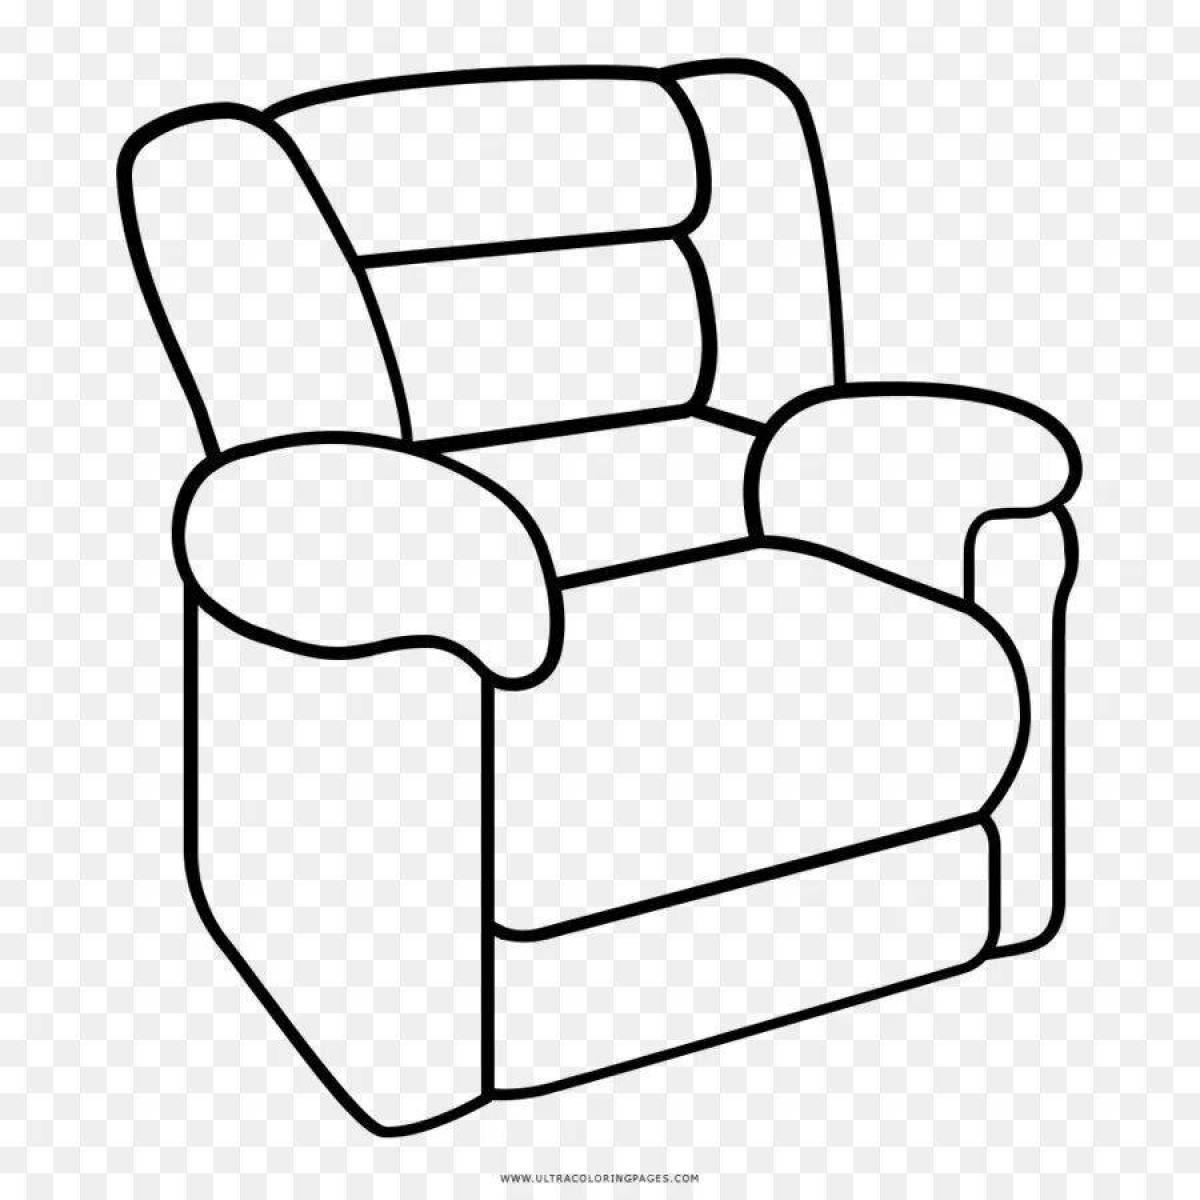 Coloring page perky sofa chair